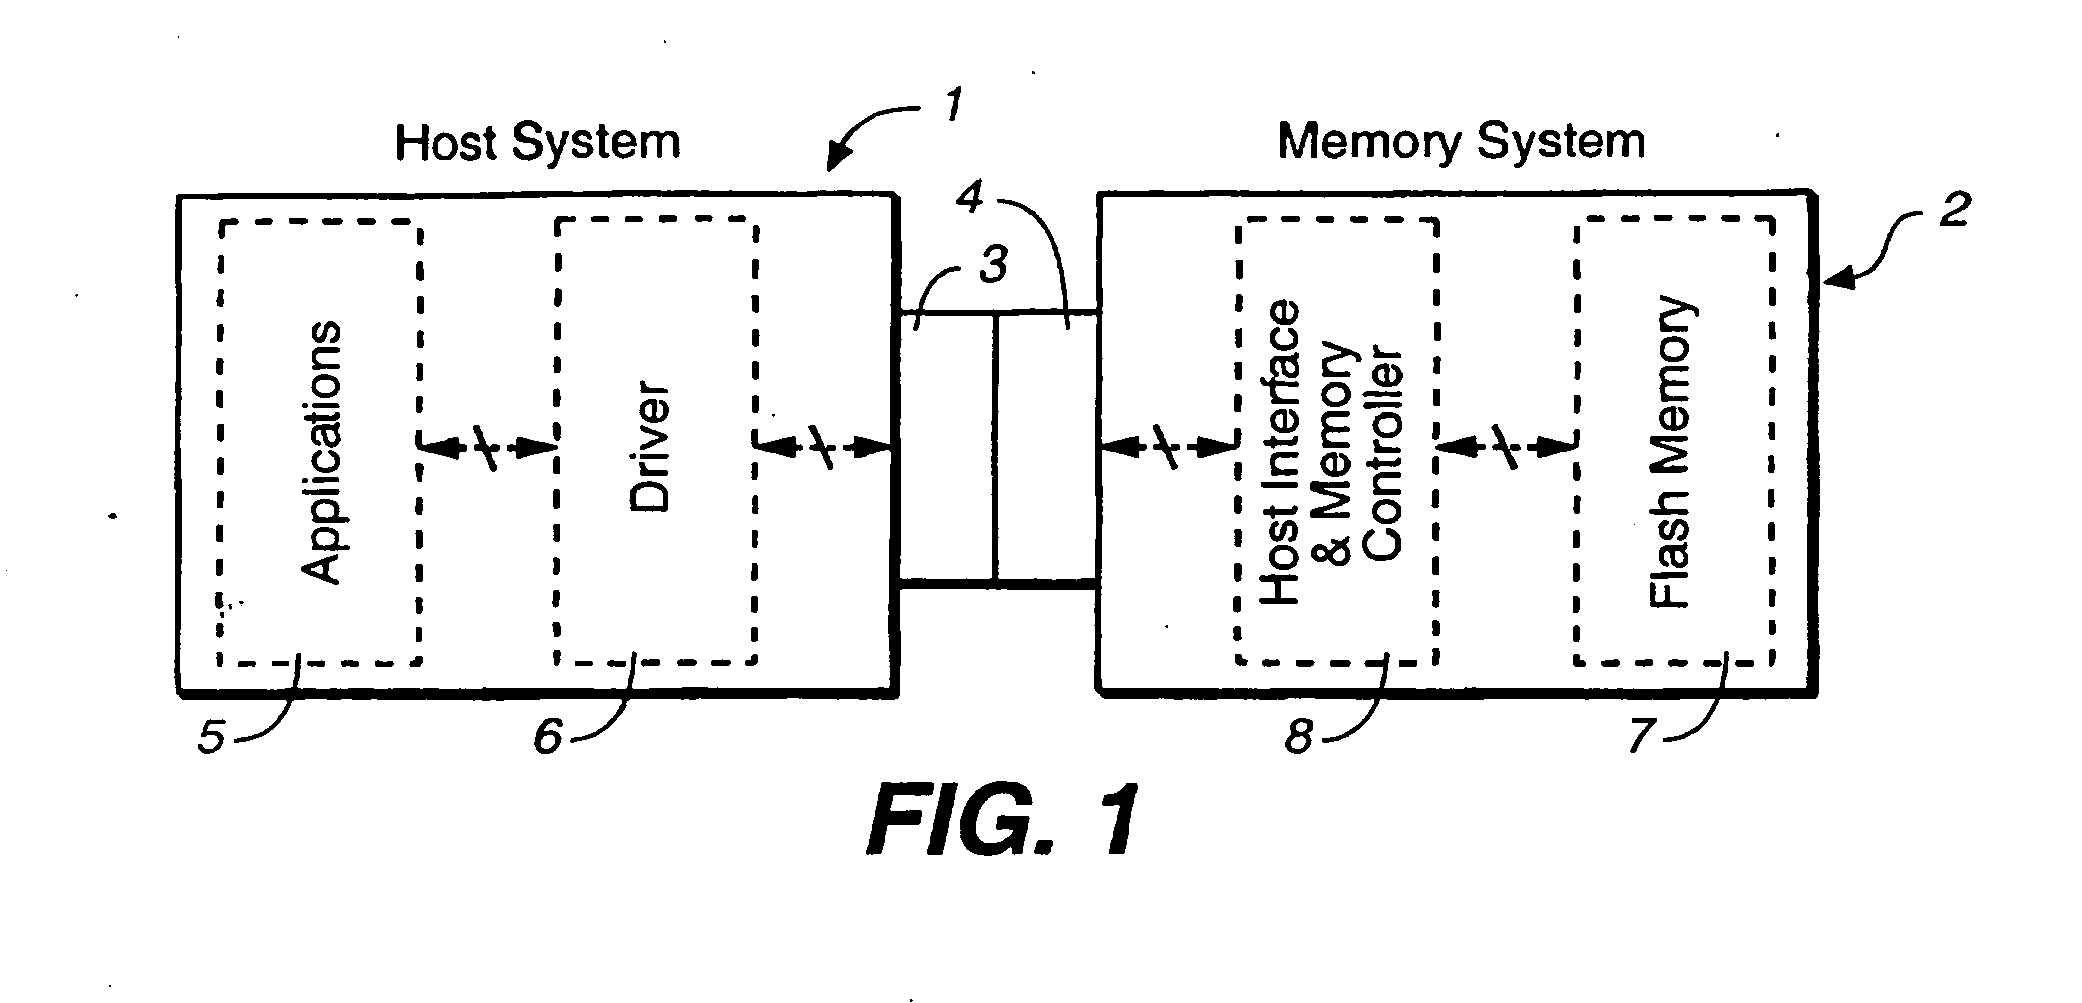 Non-volatile memories with data alignment in a directly mapped file storage system